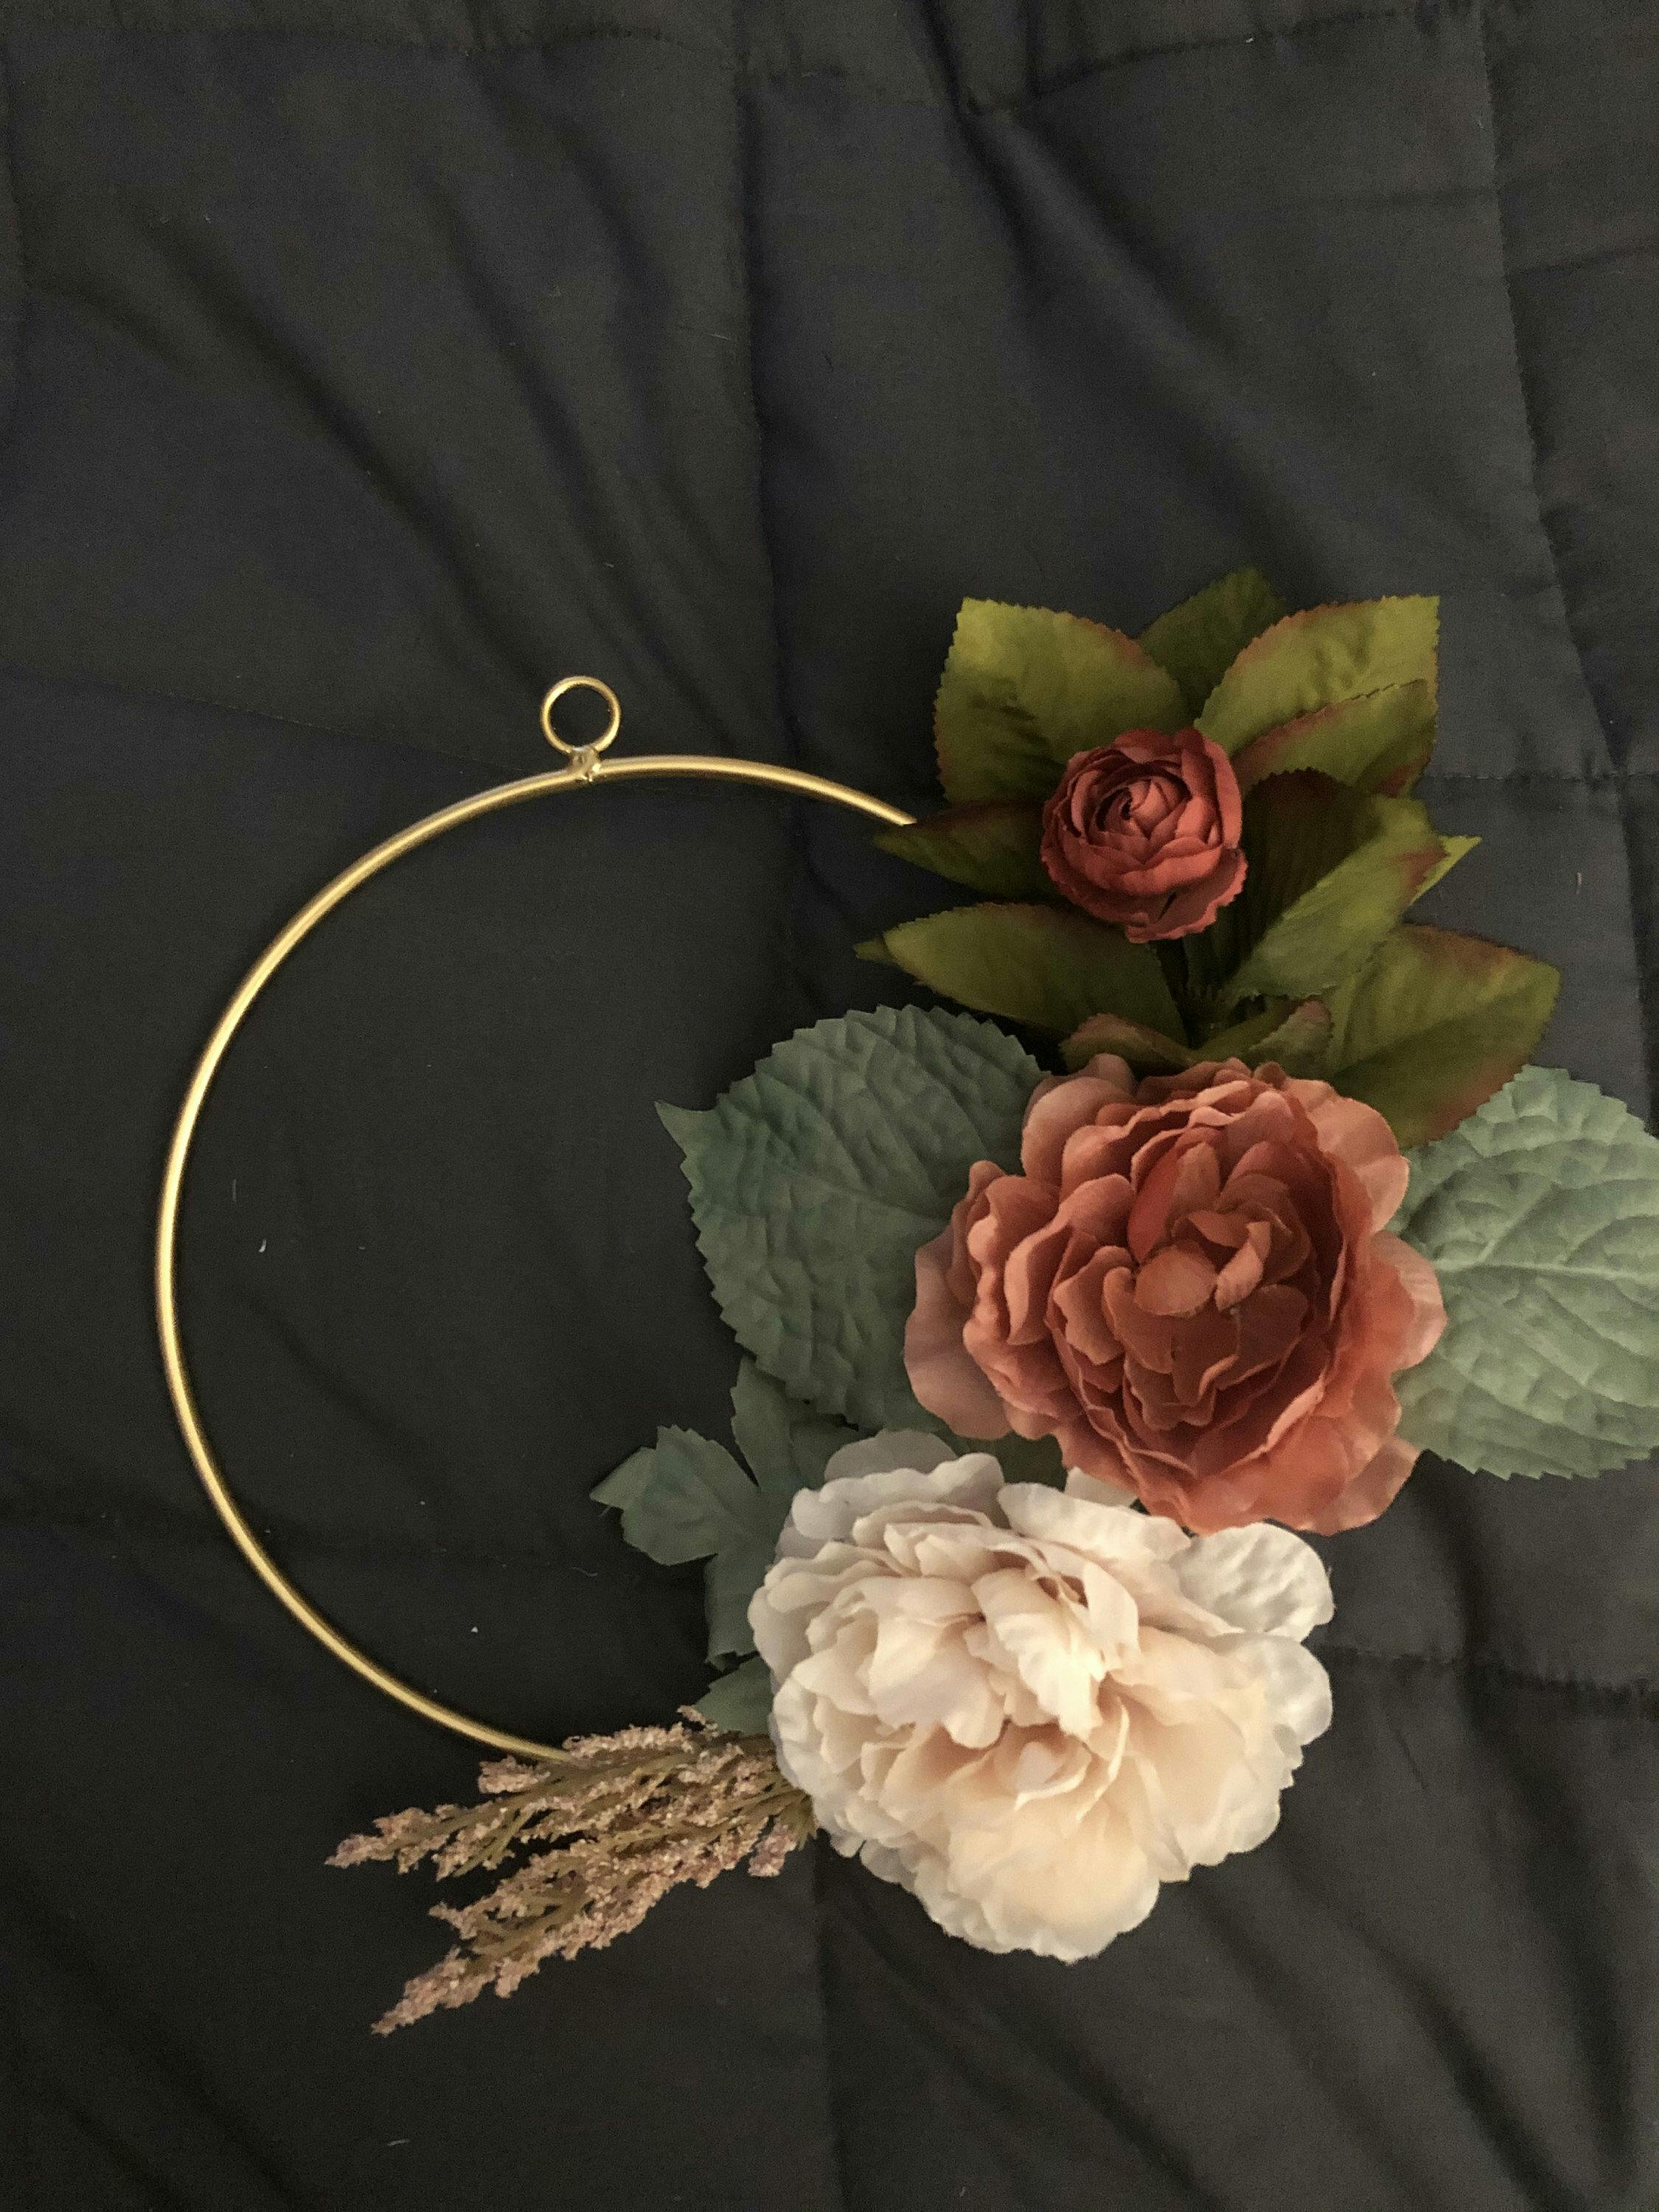 Gold Ring Floral Wreath with 3 flowers: 2 red (one small and one big), and 1 white